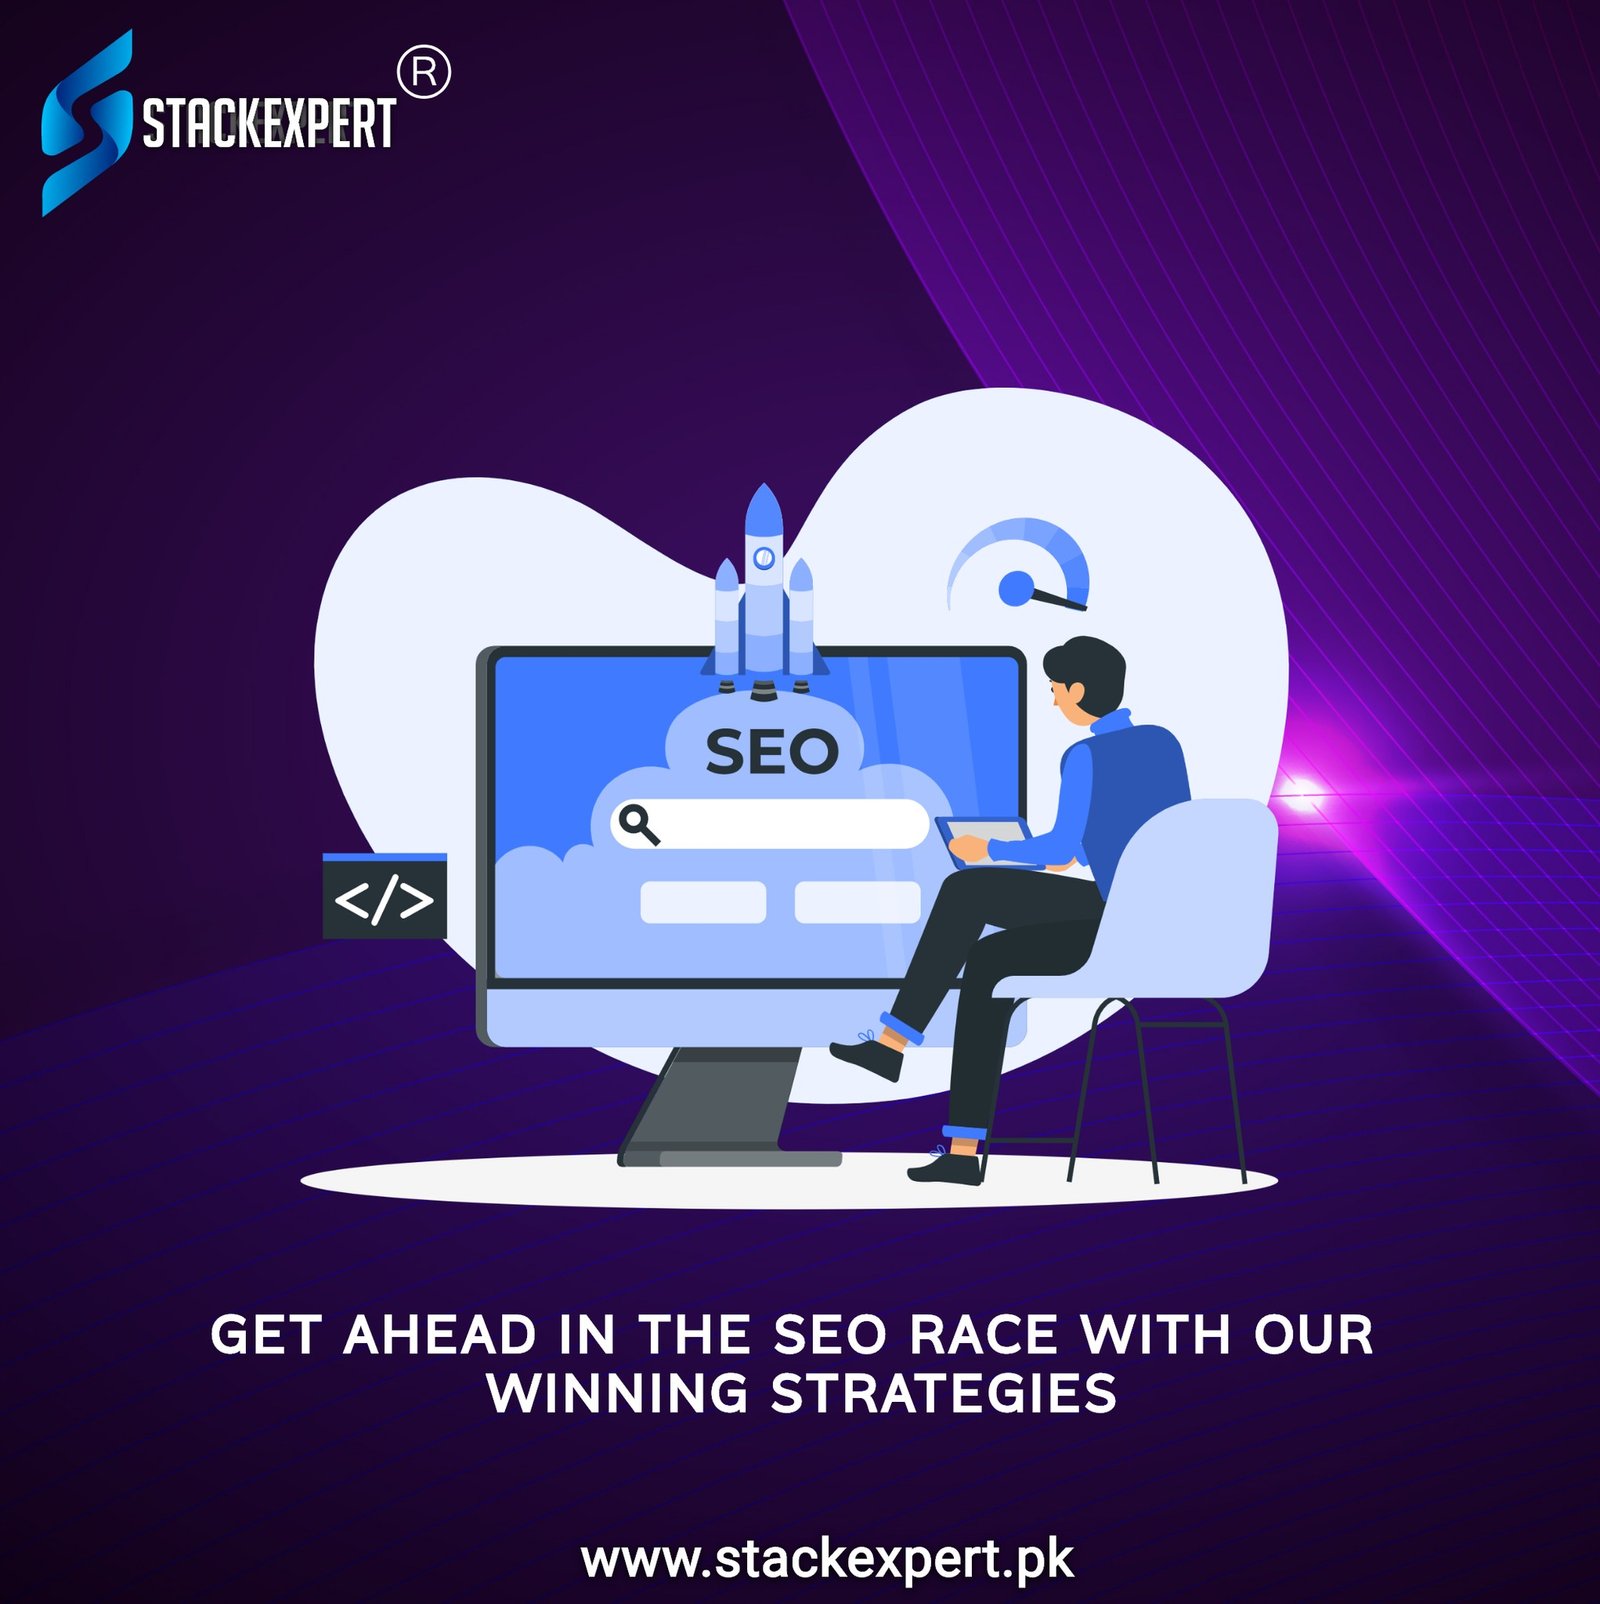 Boost Your Online Presence with Expert SEO Services from StackExpert.pk